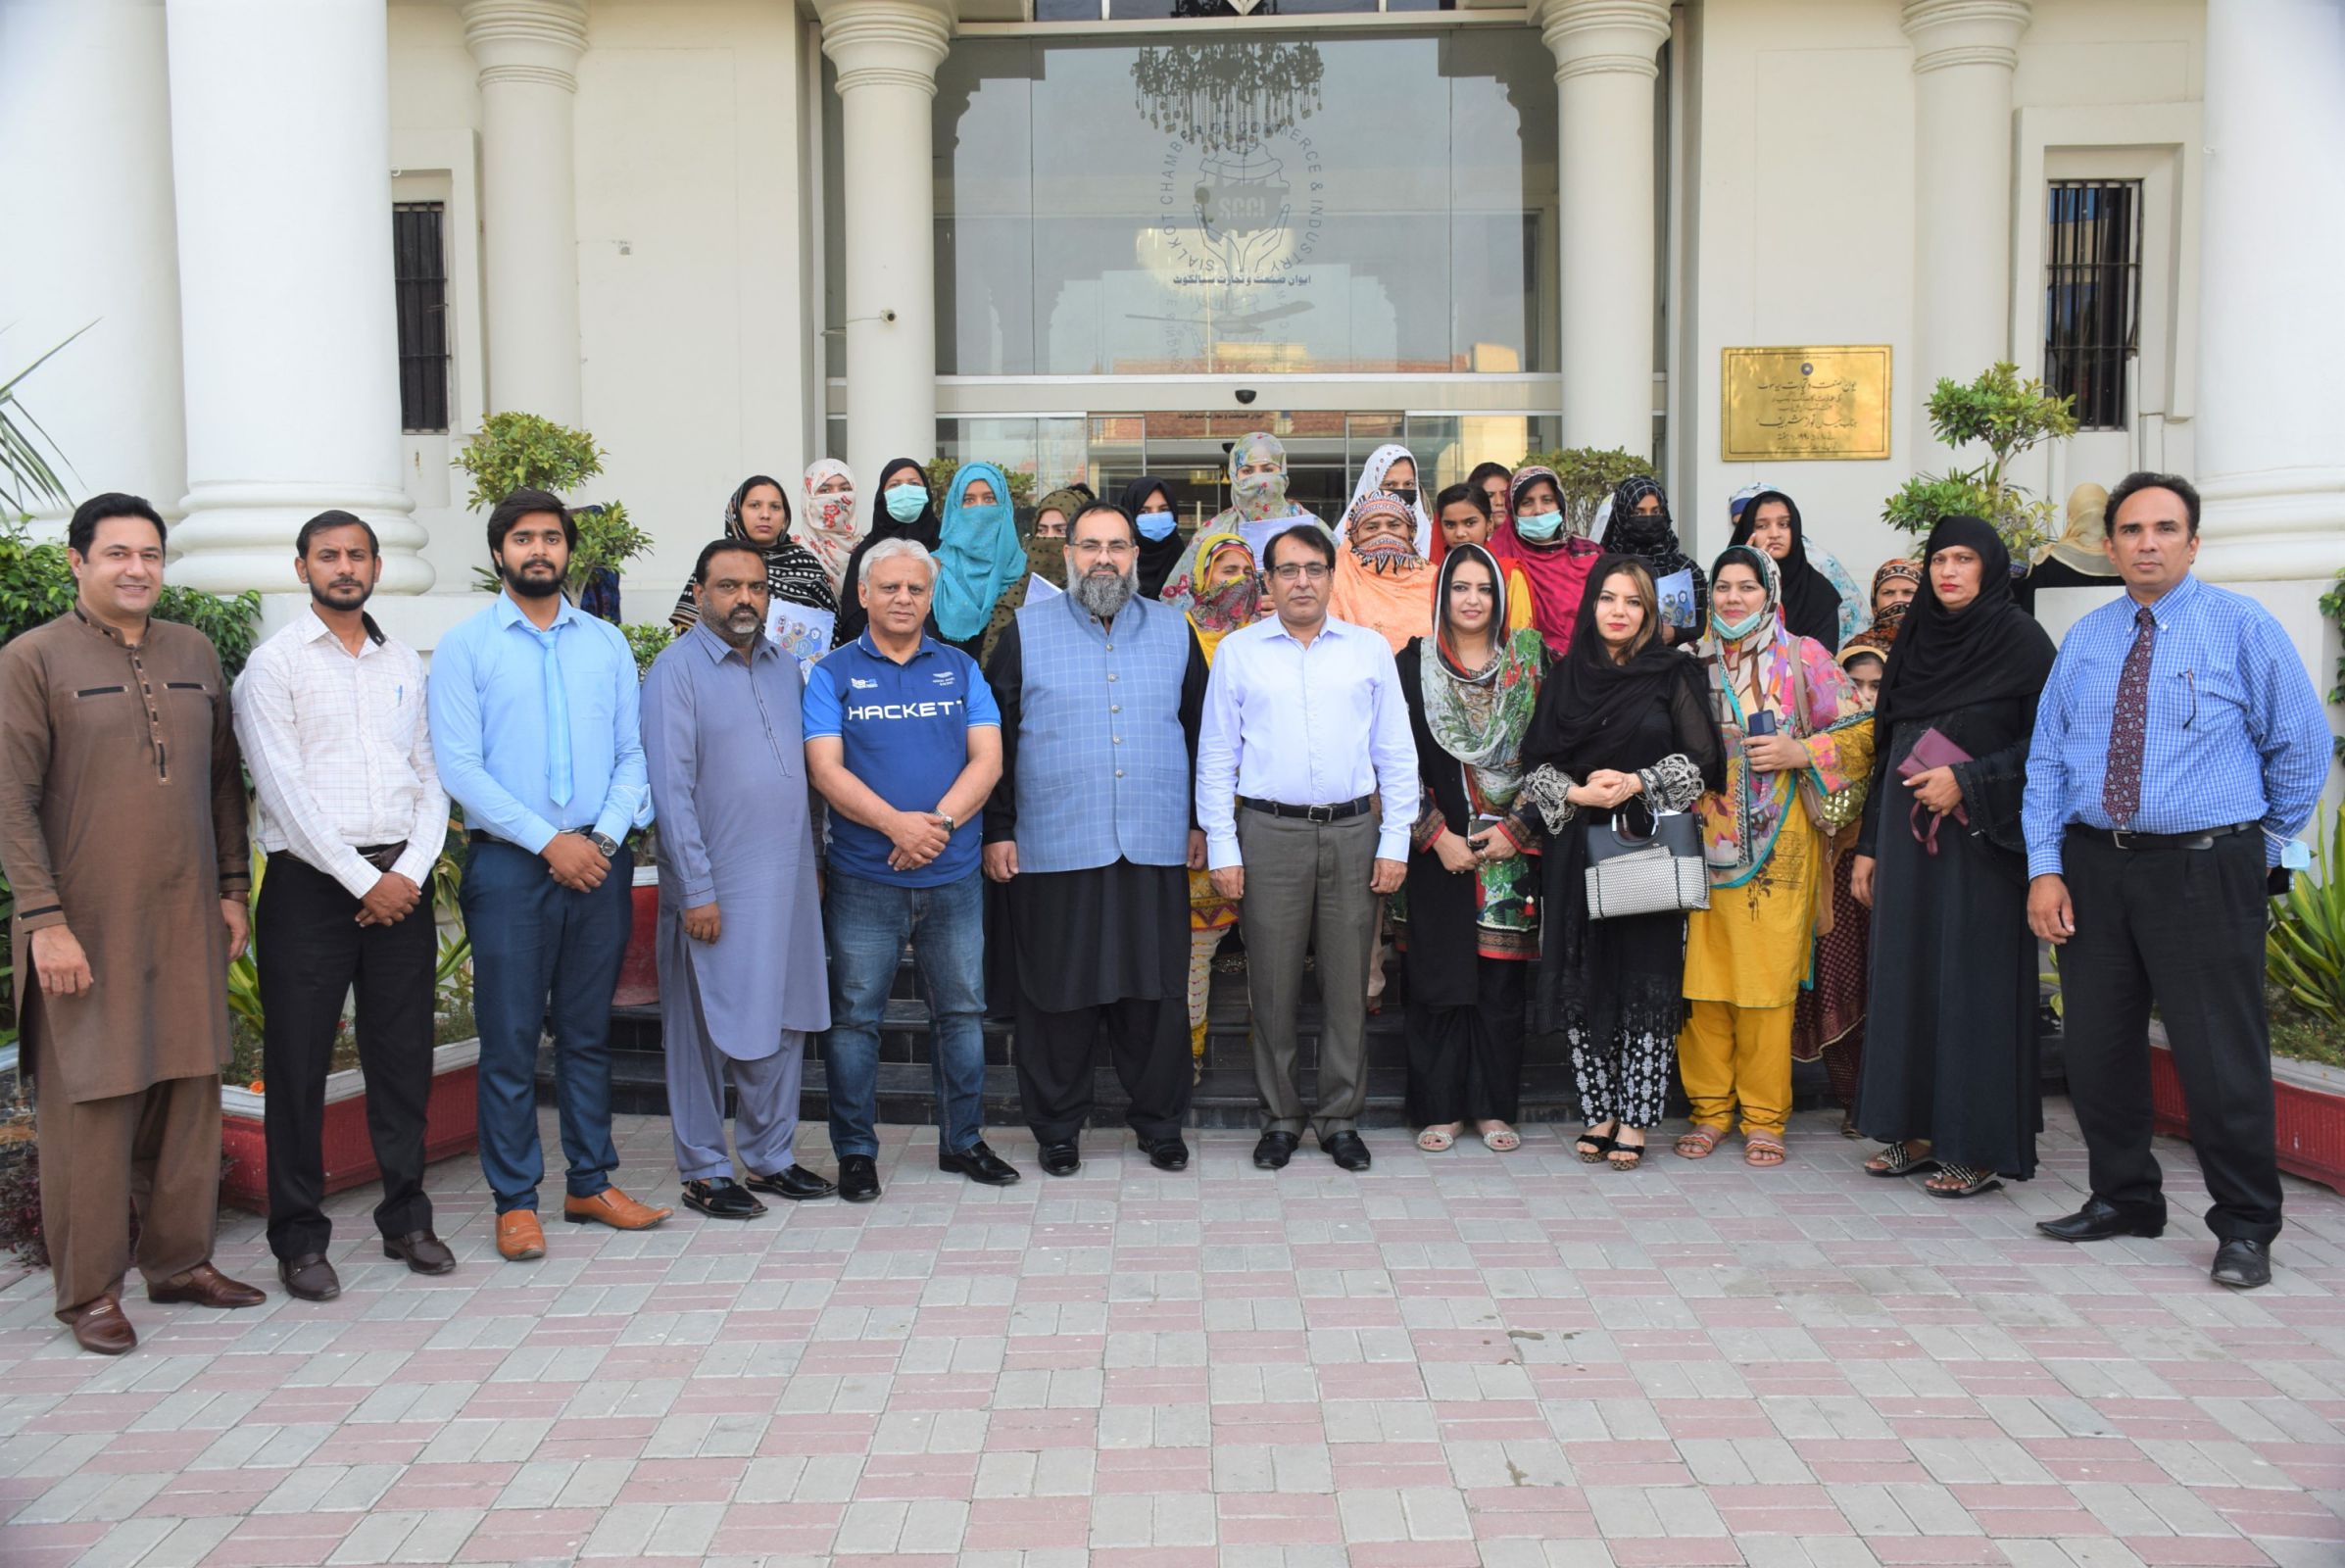 On August 04, 2021, an awareness seminar was held at Sialkot Chamber of Commerce & Industry wherein, Women from district Sialkot trained under “Baidari e Sialkot” and KIPS Academy Sialkot participated.    Speaking to the Guests, Mr. Khuram Aslam, Senior Vice President, SCCI briefed the audience about the working of SCCI and facilities given to Members of Sialkot Chamber.   Mr. Abdul Basit, Director, KIPS Sialkot said that KIPS is playing a pivotal role in the progress of quality education in the country and also expressed gratitude to Mr. Amir Sulehri, Meramaan for organizing this training for Women seeking career paths   Mr. Khuram Aslam recommended that an MOU should be signed between SCCI and KIPS for future collaborations. Also KIPS should also sign an MOU with WCCIS.